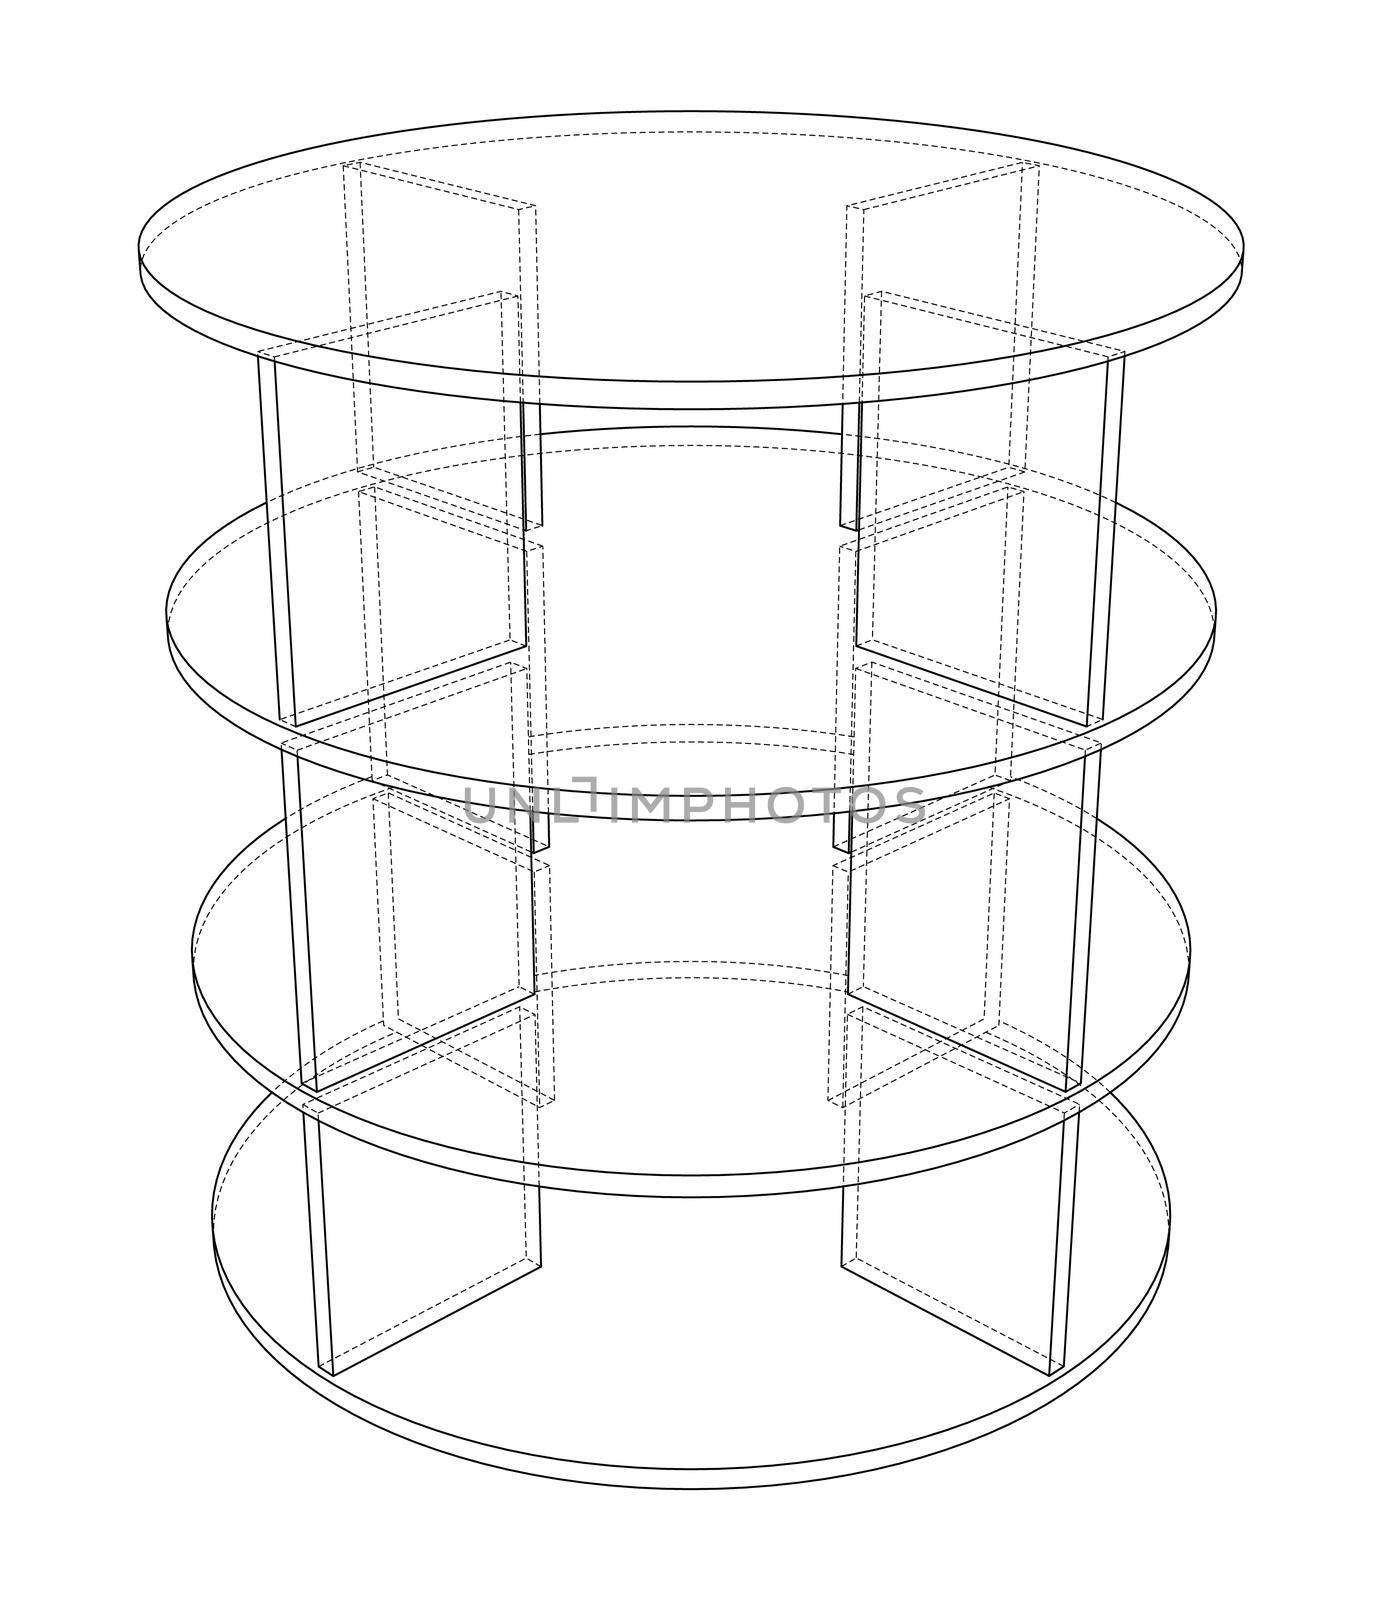 Empty showcase outline. 3d illustration. Wire-frame style